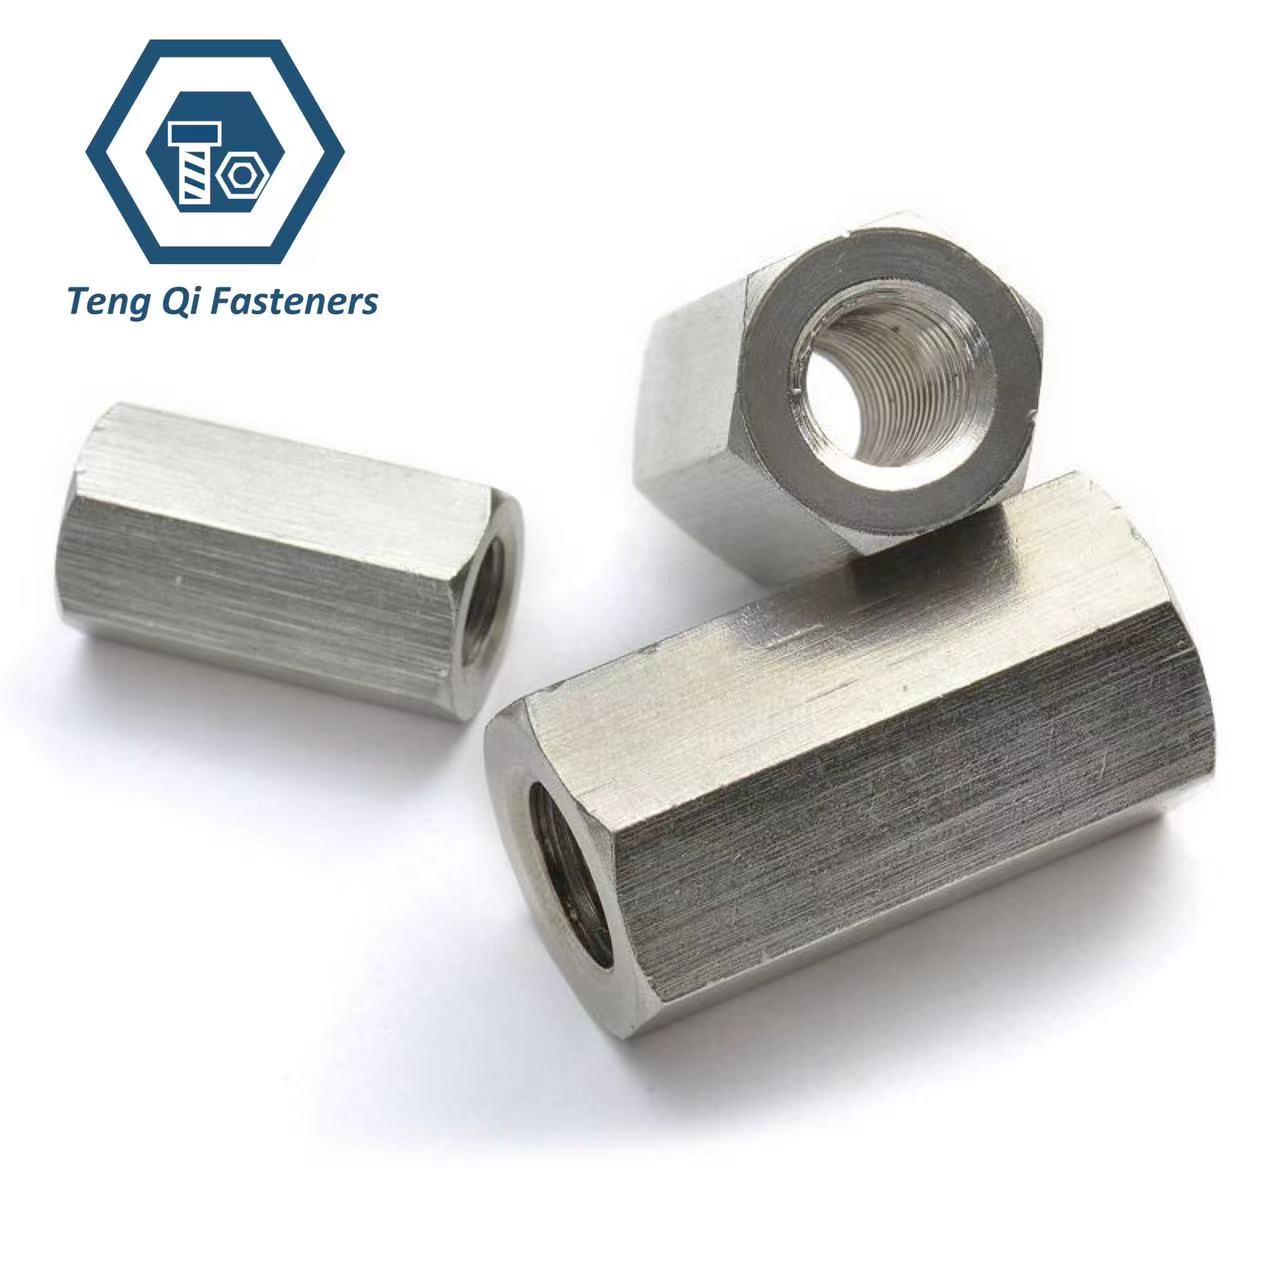 High Quality DIN6334 Stainless Steel Coupling Nuts Long Nuts